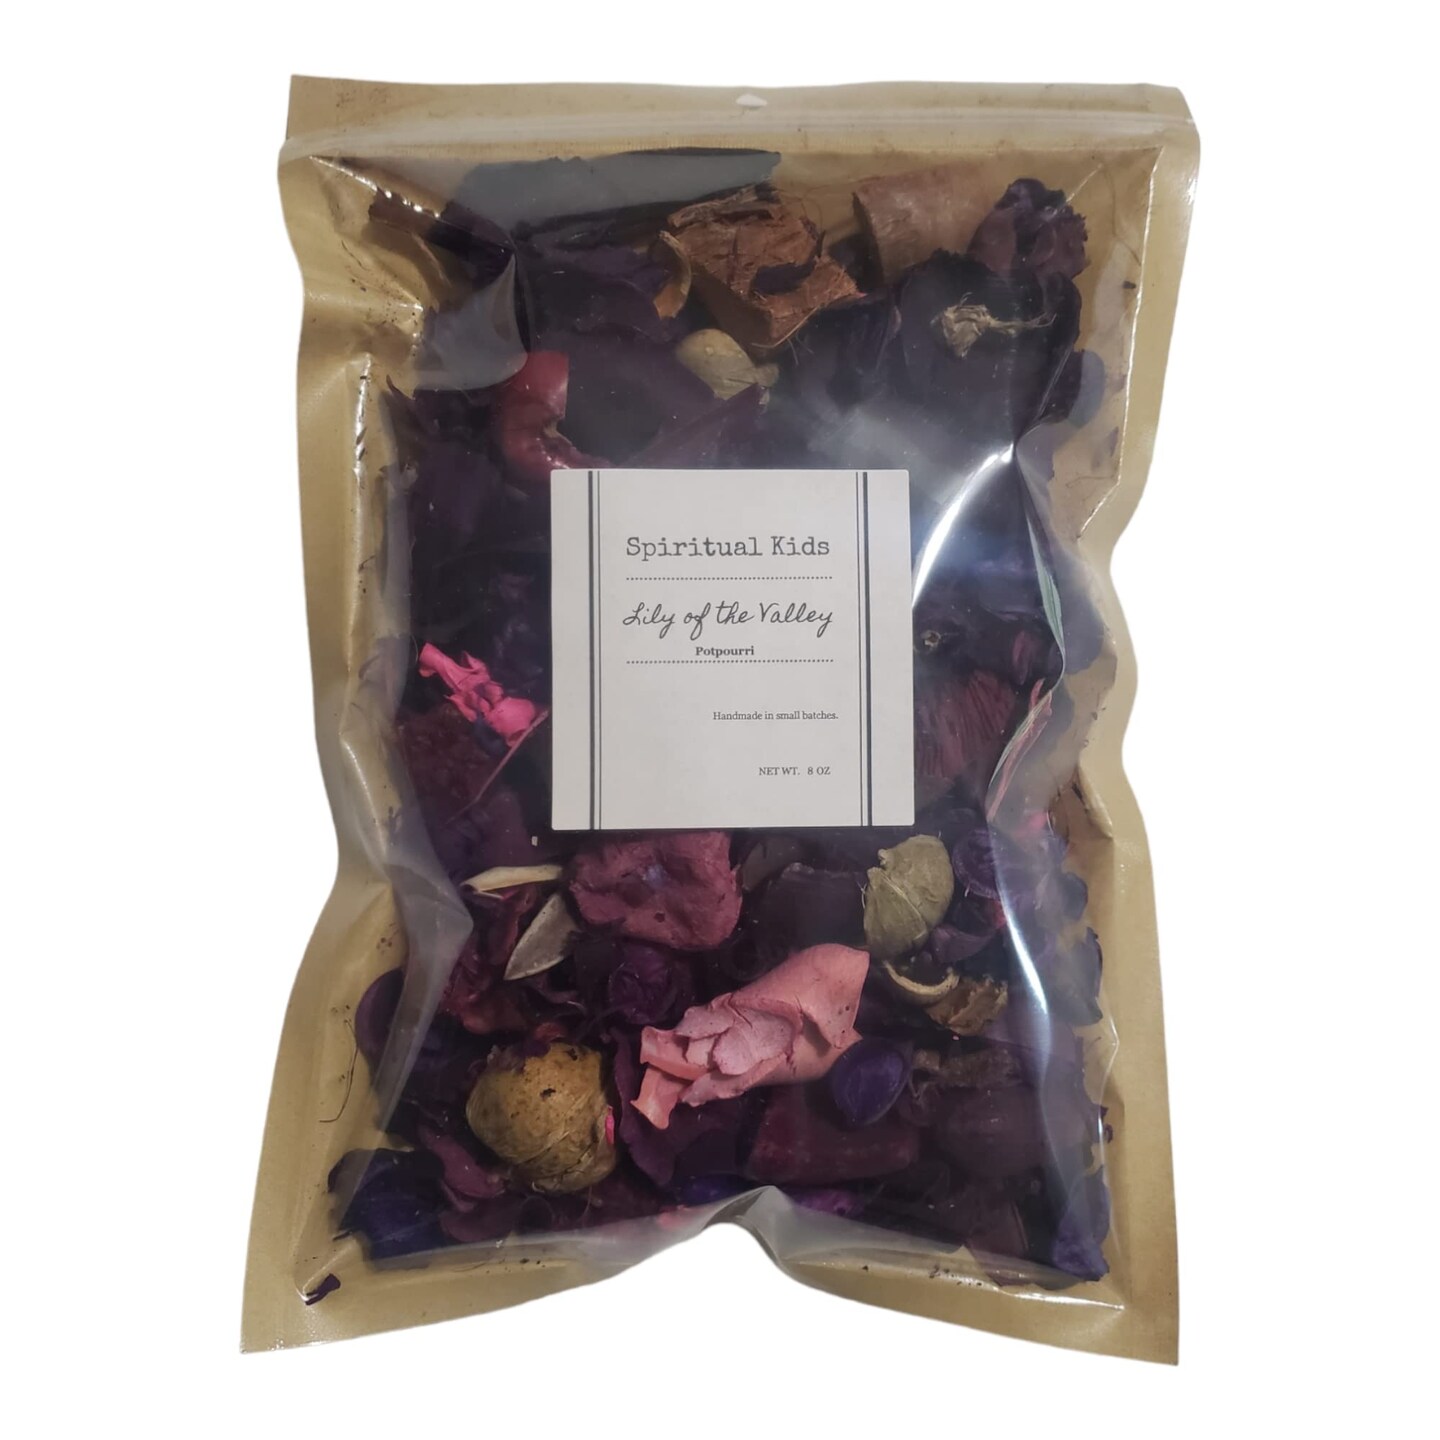 Lily of the Valley 8oz Potpourri made with Fragrant/Essential Oils Hand Made FREE SHIPPING | Floral Potpourri | Highly Scented | House Warming Gift